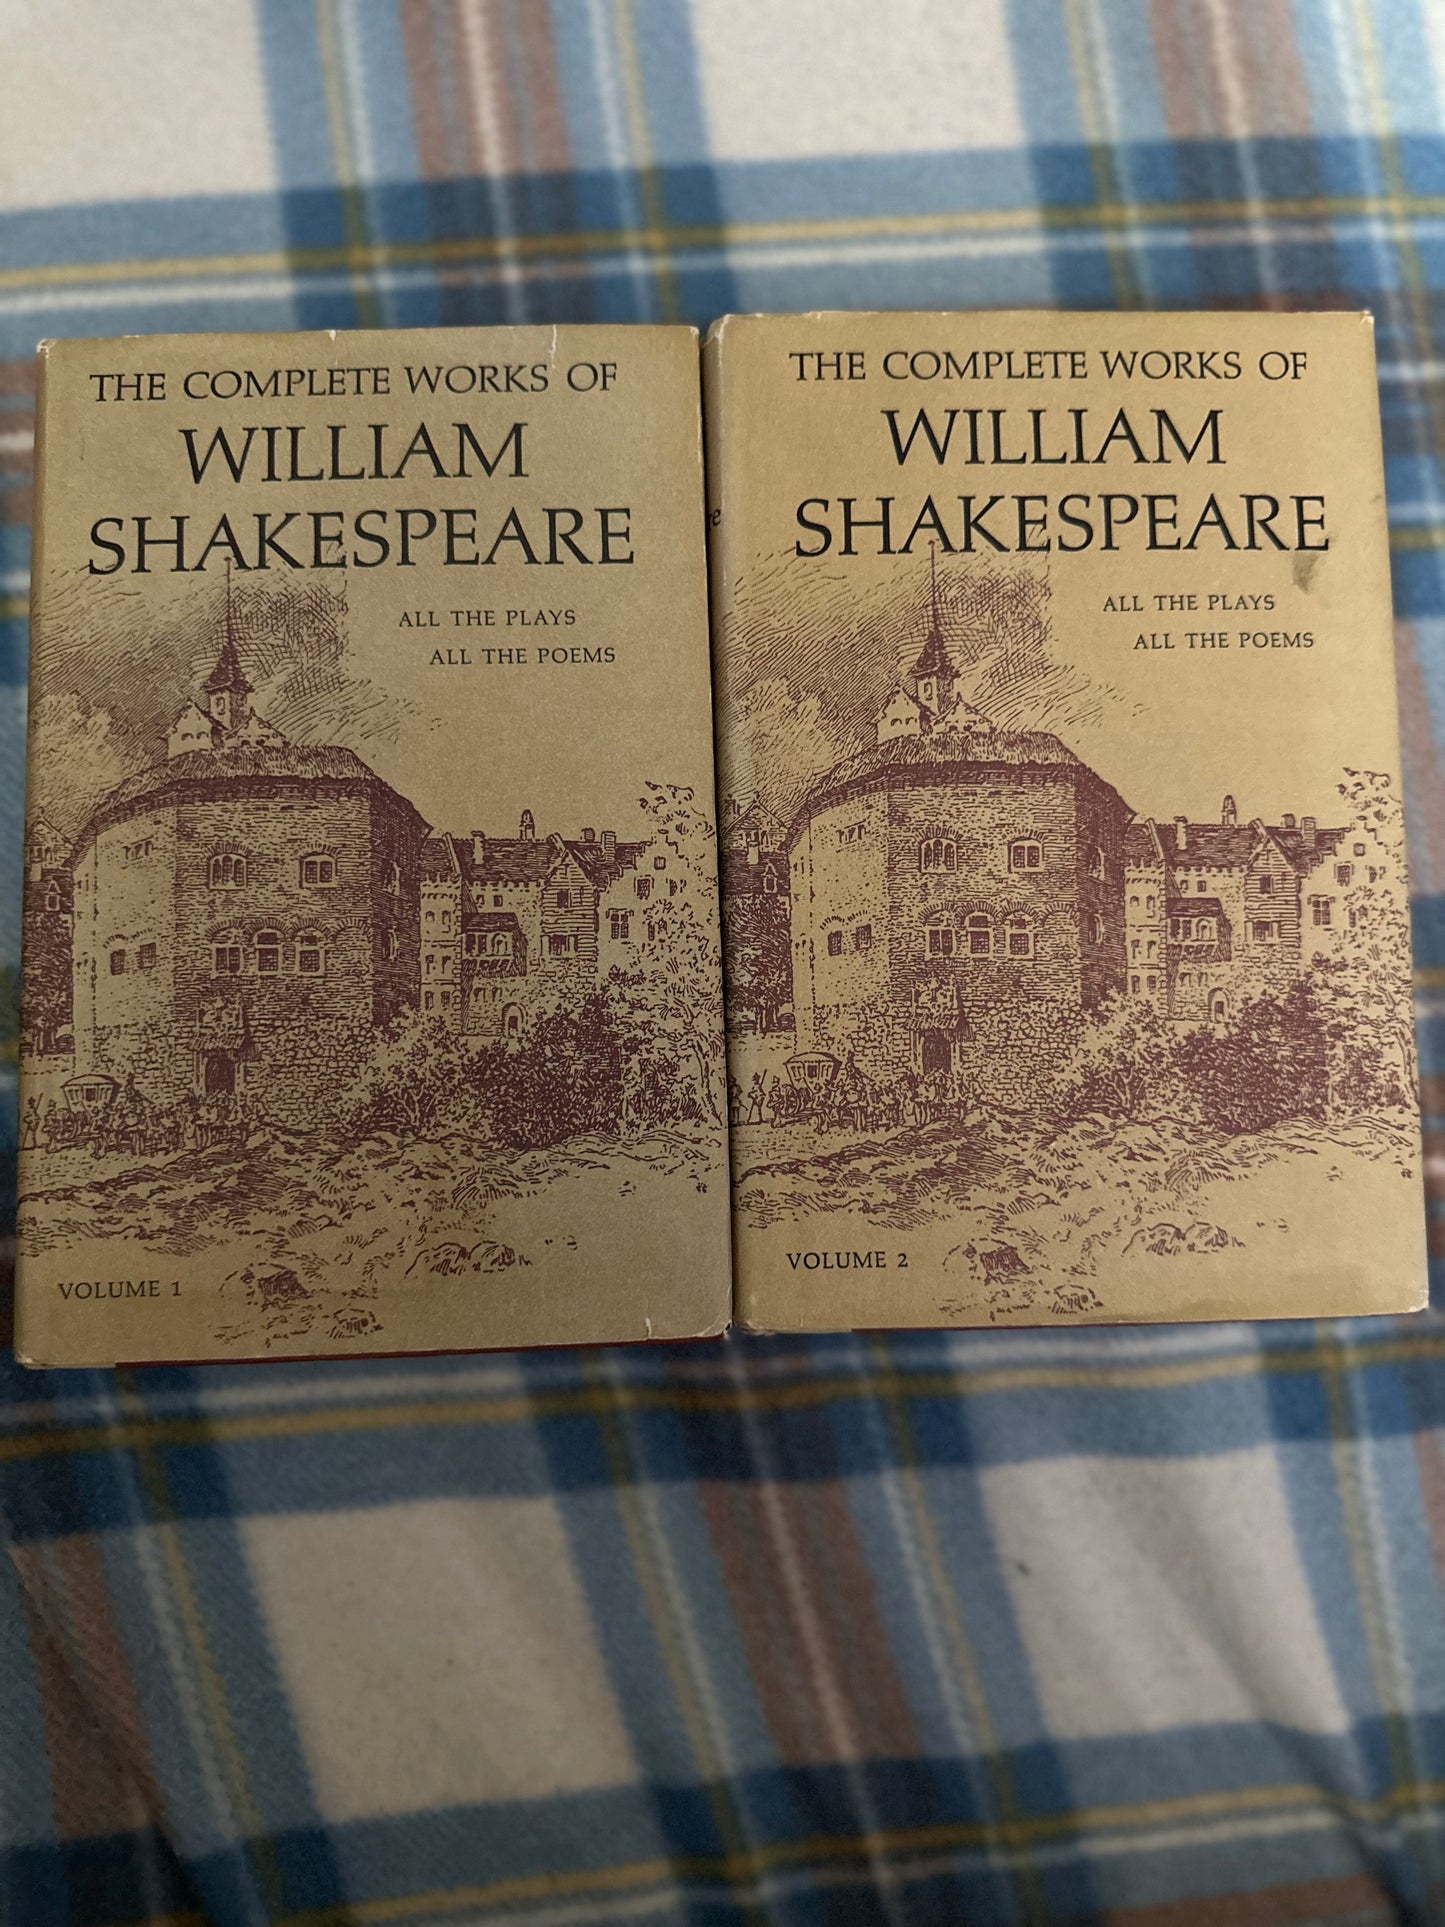 The Complete Works Of William Shakespeare edited by W. G. Clark & W. Aldis Wright(Nelson Doubleday Inc New York) 2 volumes